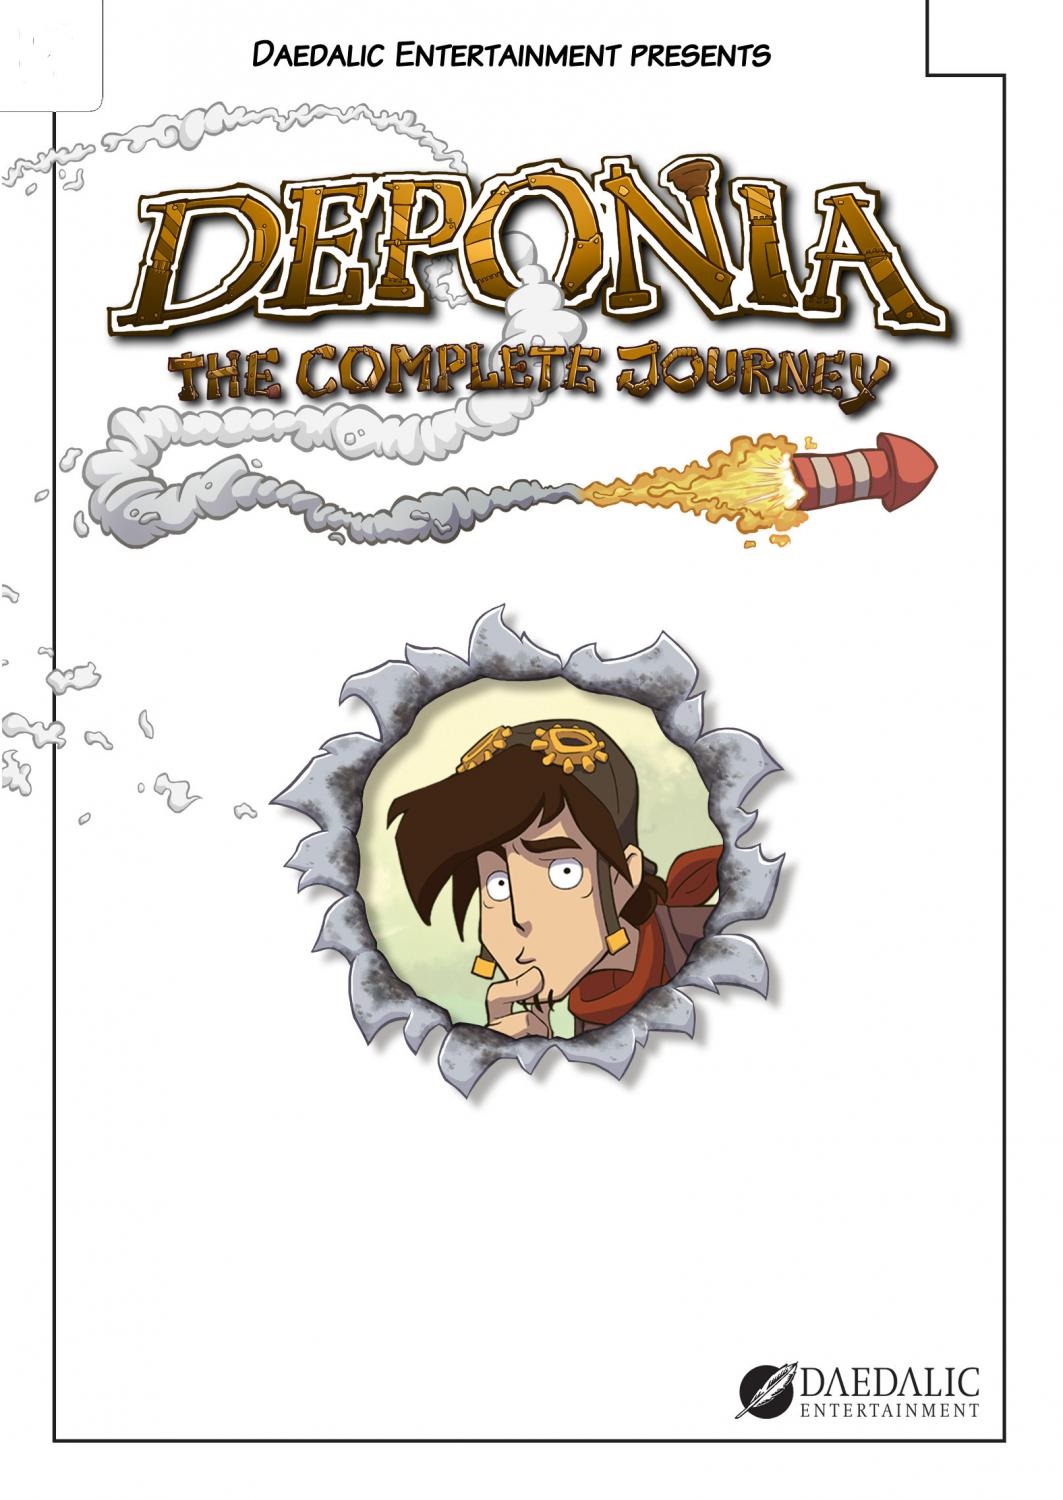 deponia the complete journey gameplay